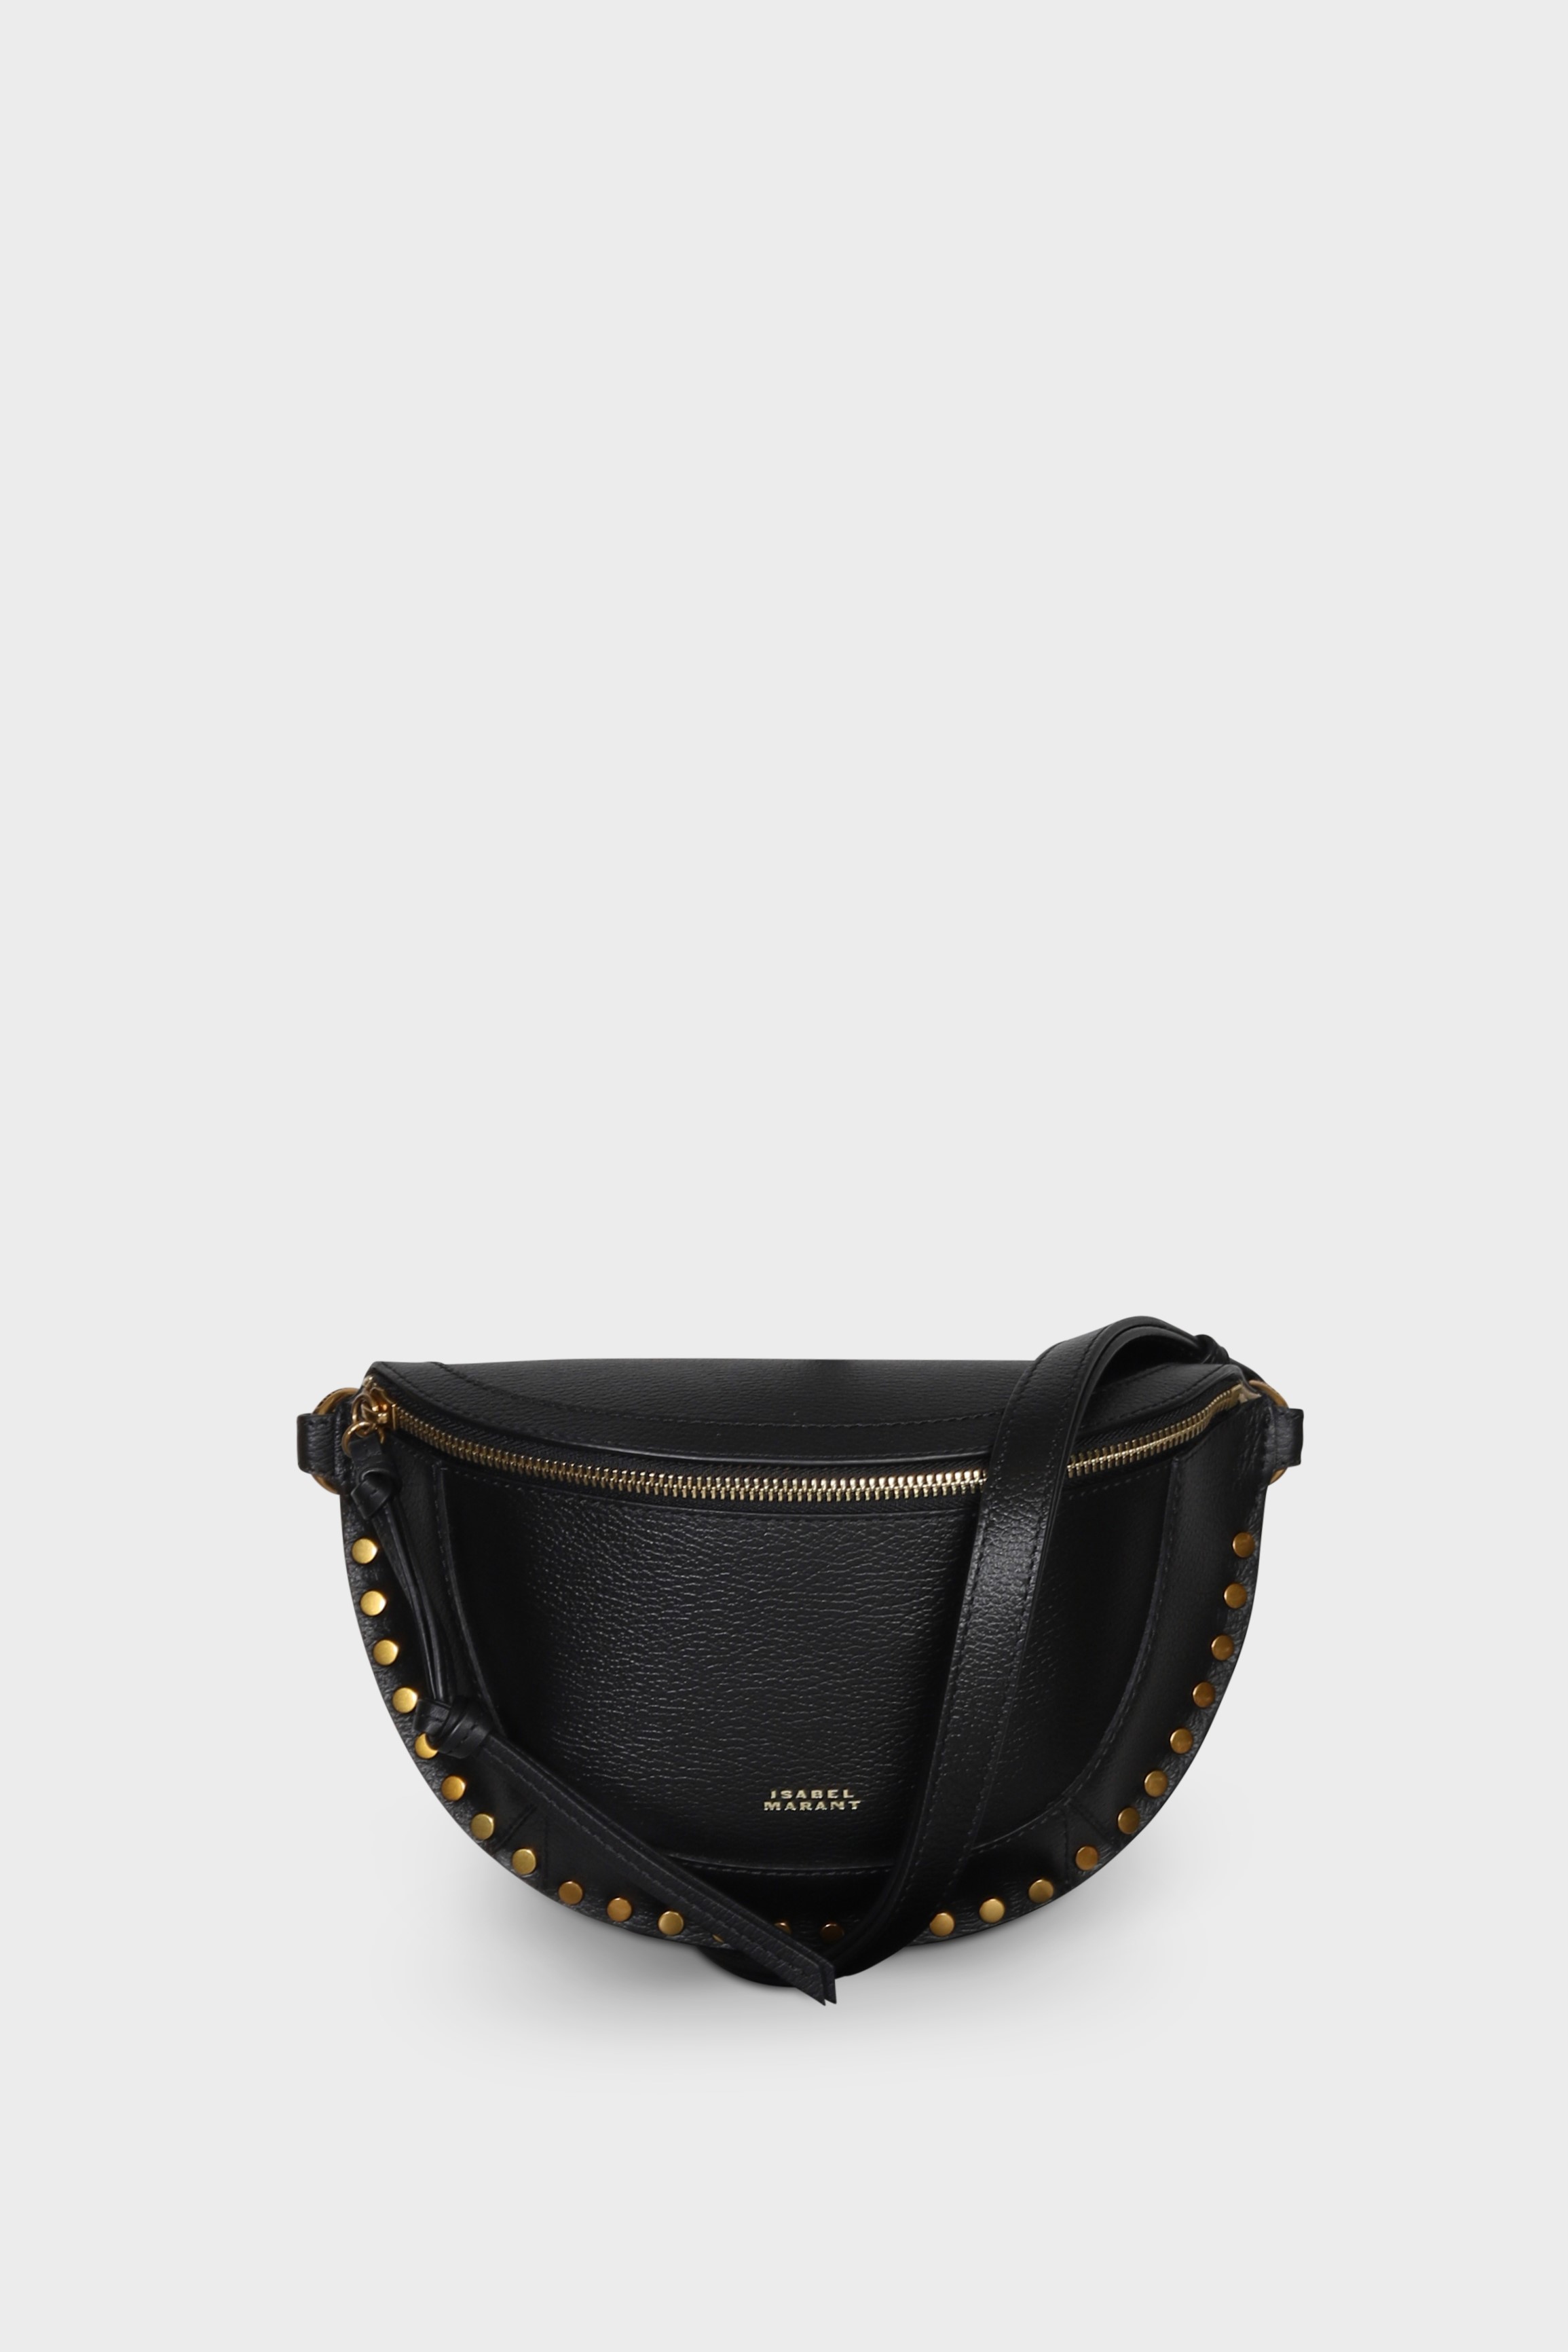 ISABEL MARANT Skano Fannypack in Black with Studs